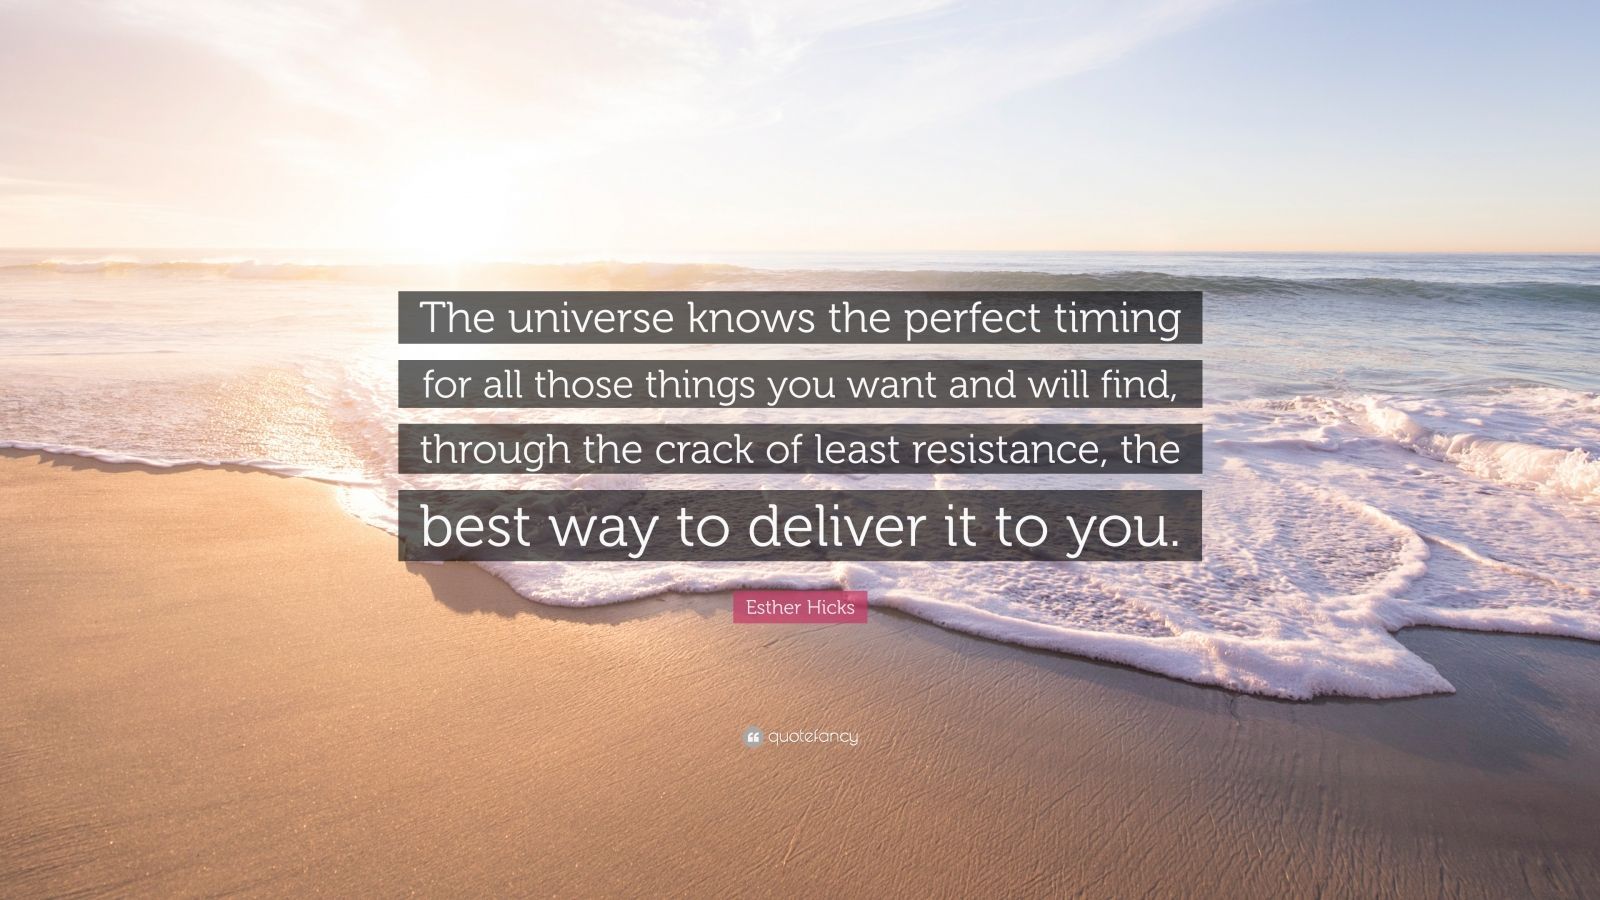 Esther Hicks Quote: “The universe knows the perfect timing for all those things you want and will find, ck of least resistance.” (7 wallpaper)